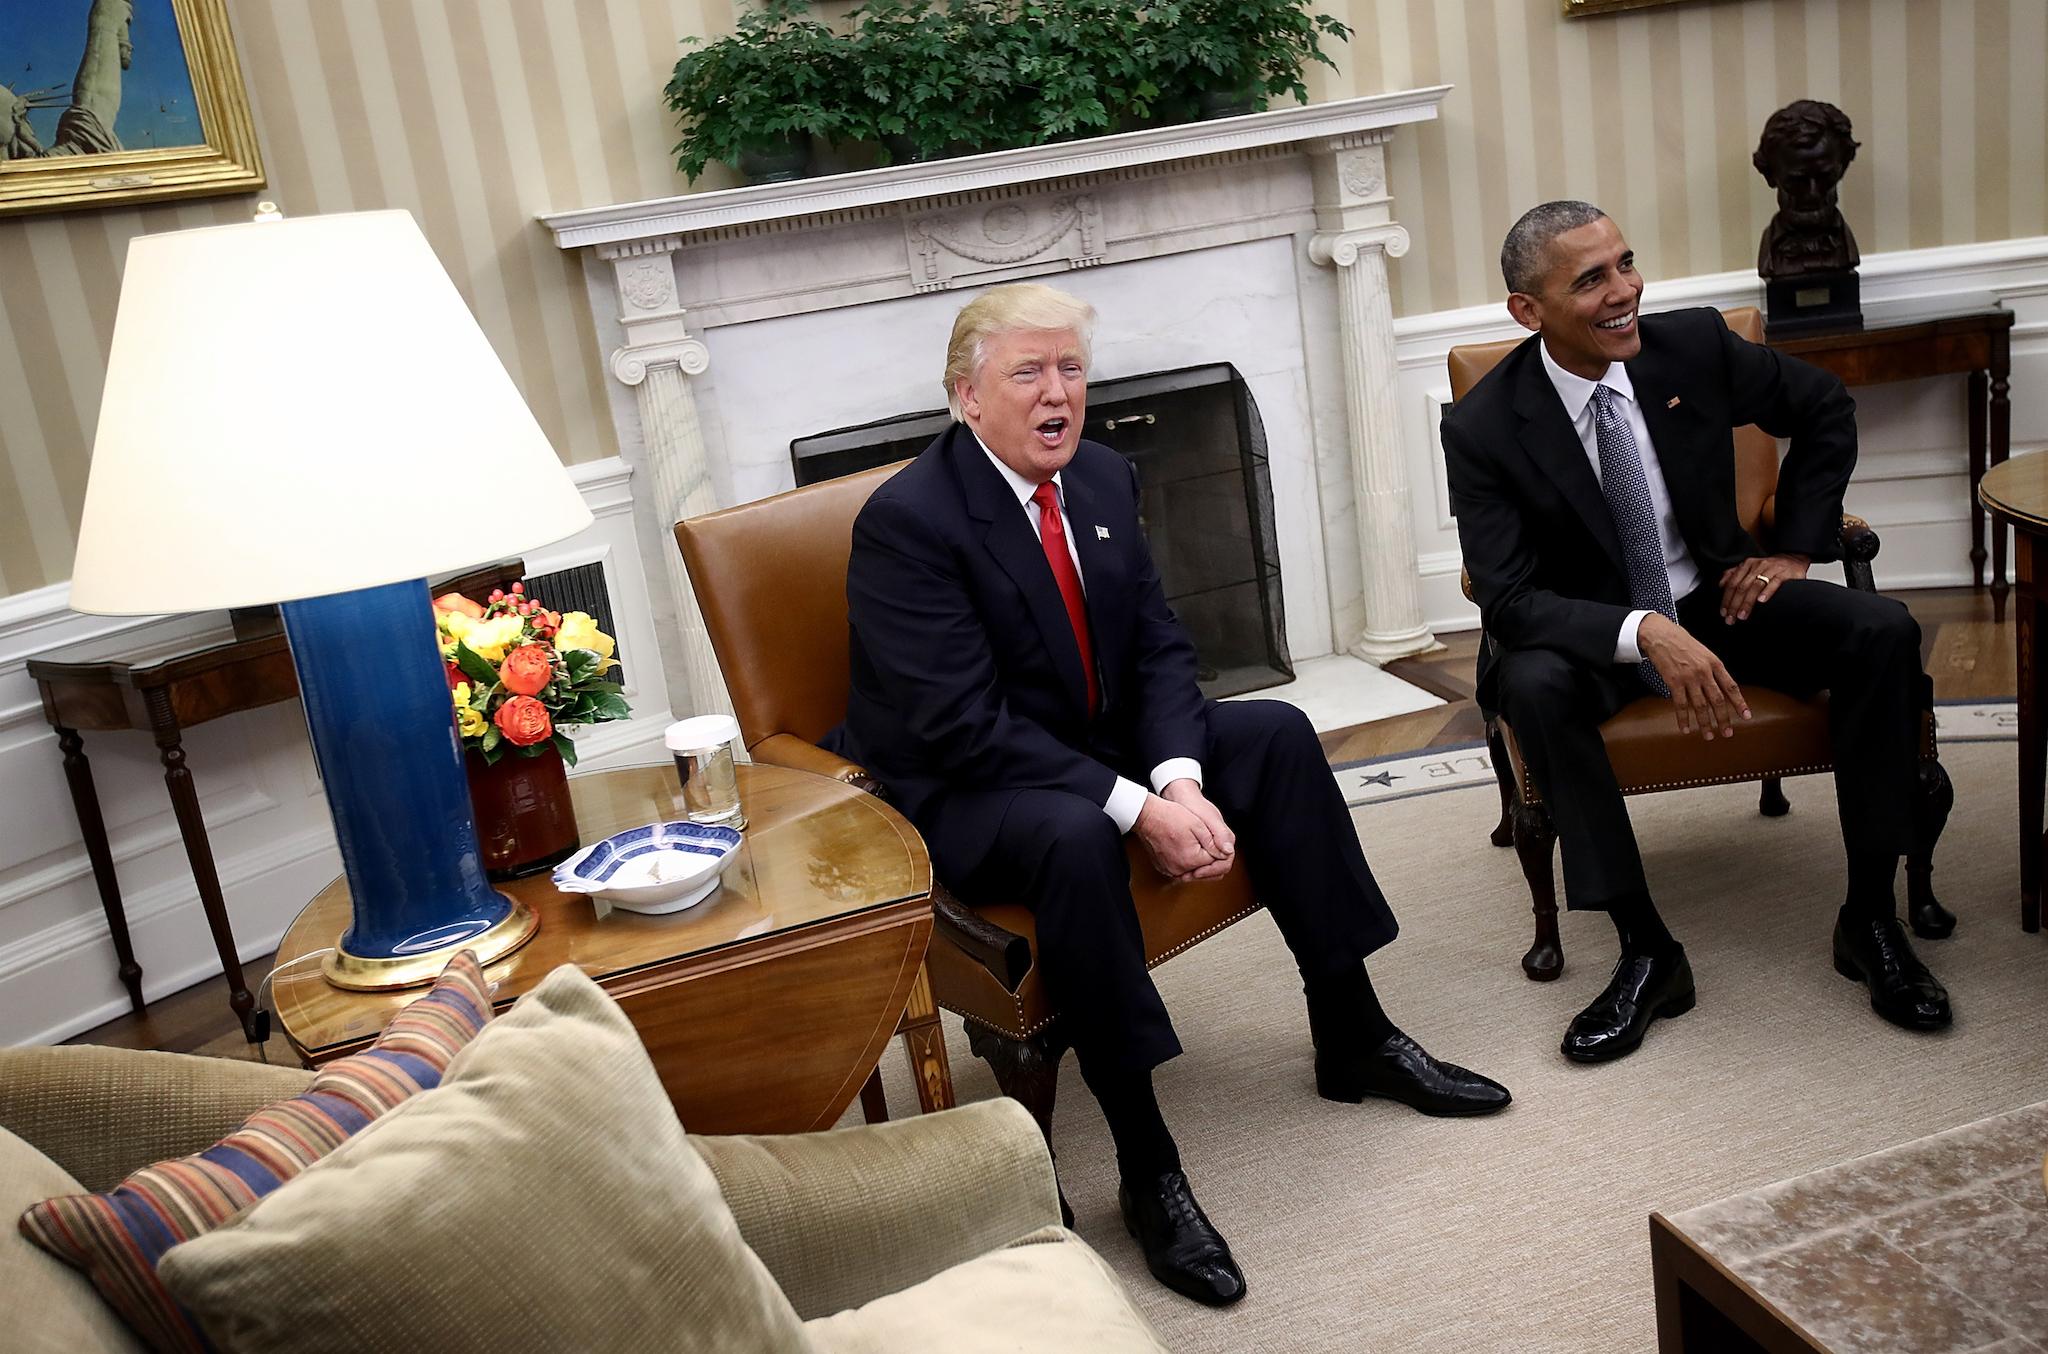 President-elect Donald Trump (L) talks after a meeting with U.S. President Barack Obama (R) in the Oval Office November 10, 2016 in Washington, DC